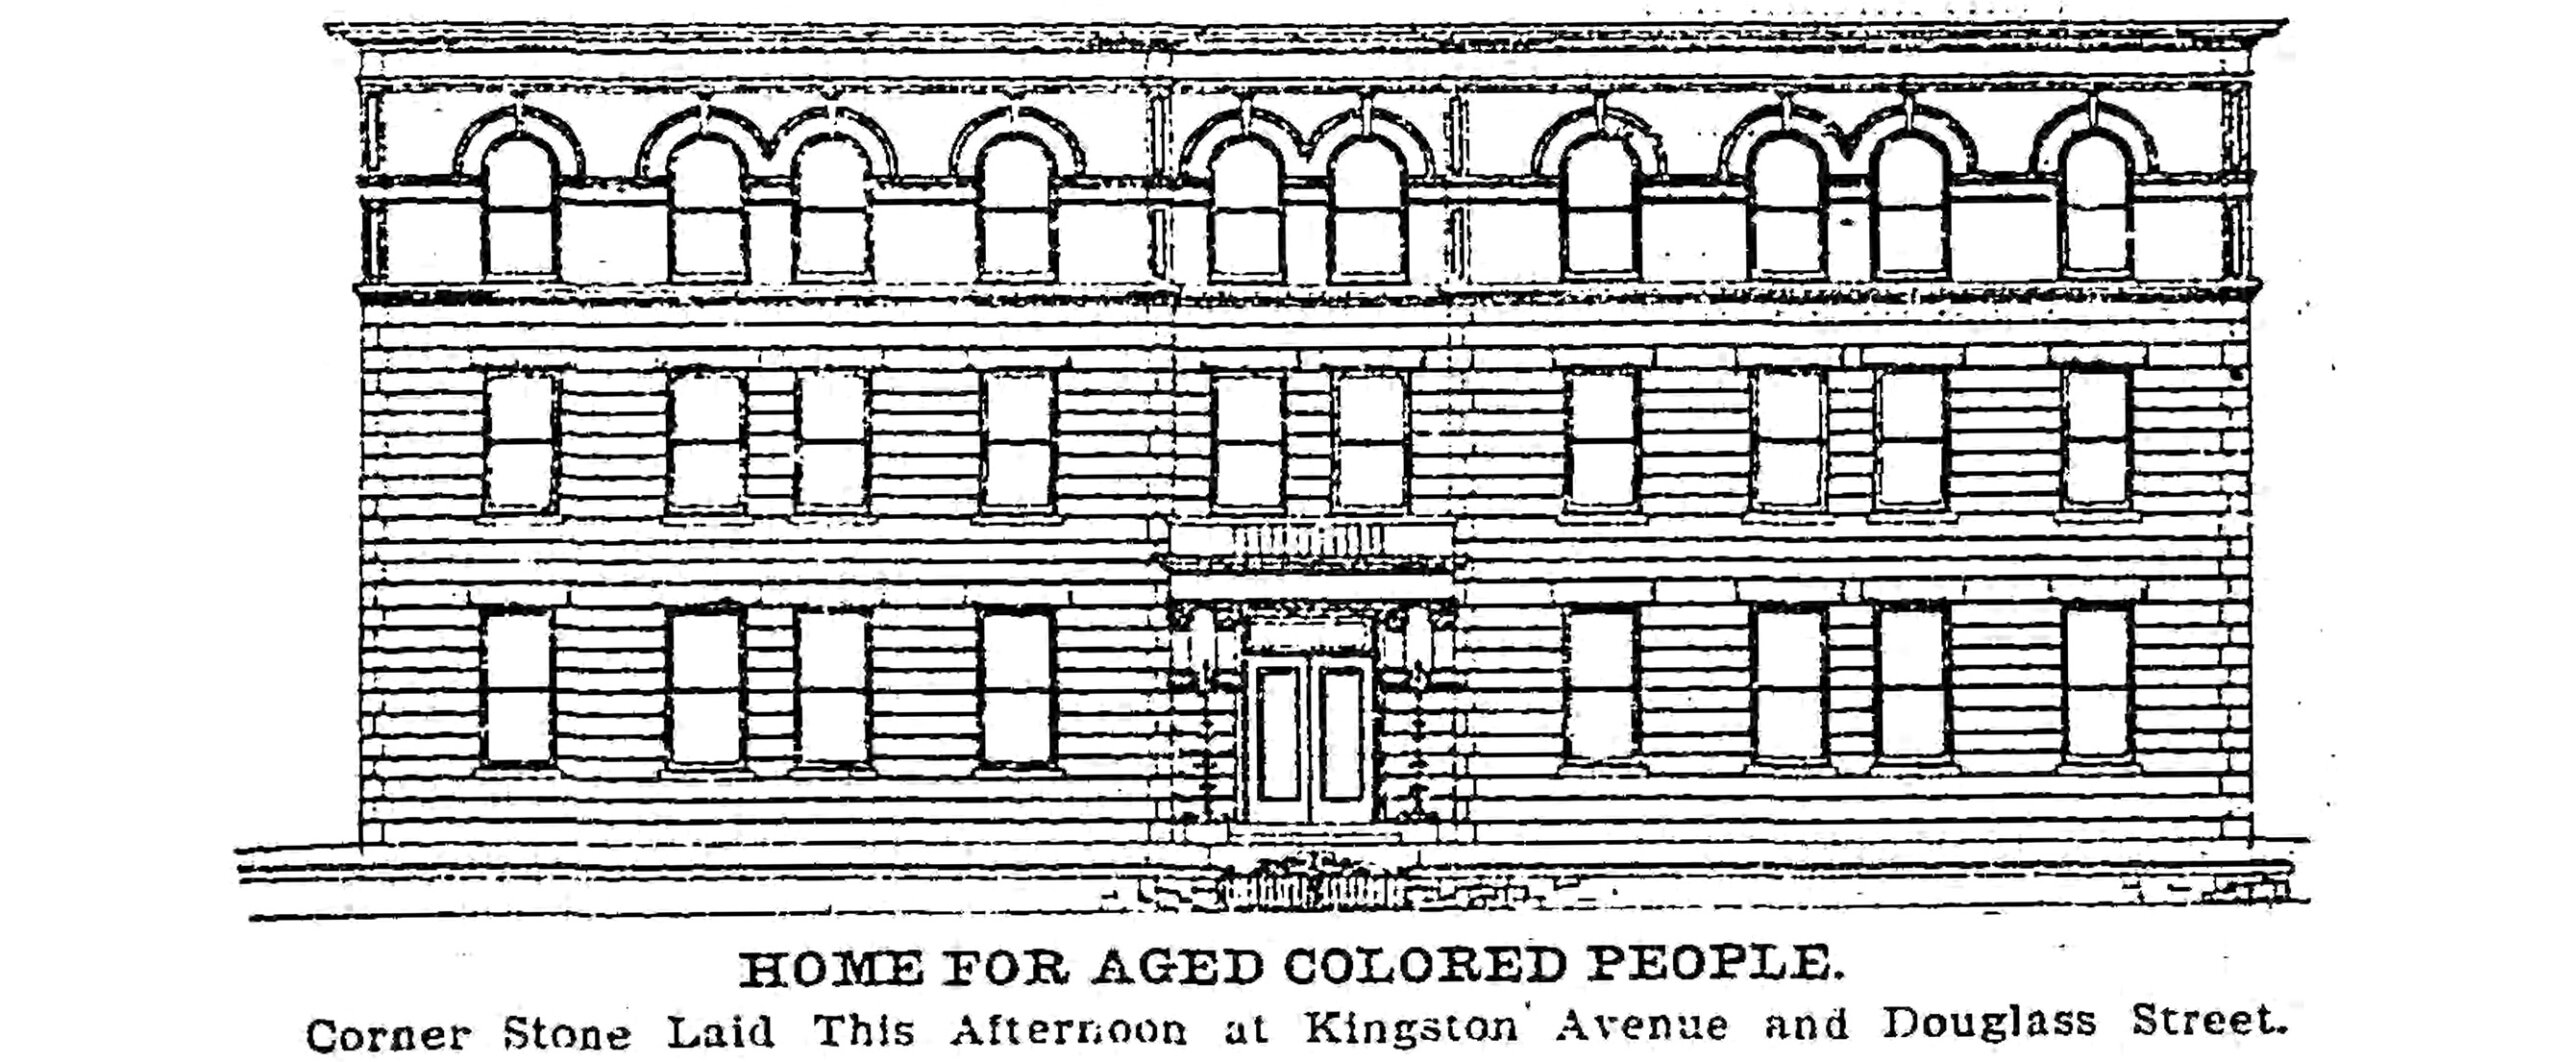 black and white line drawing showing the front facade of the three story building